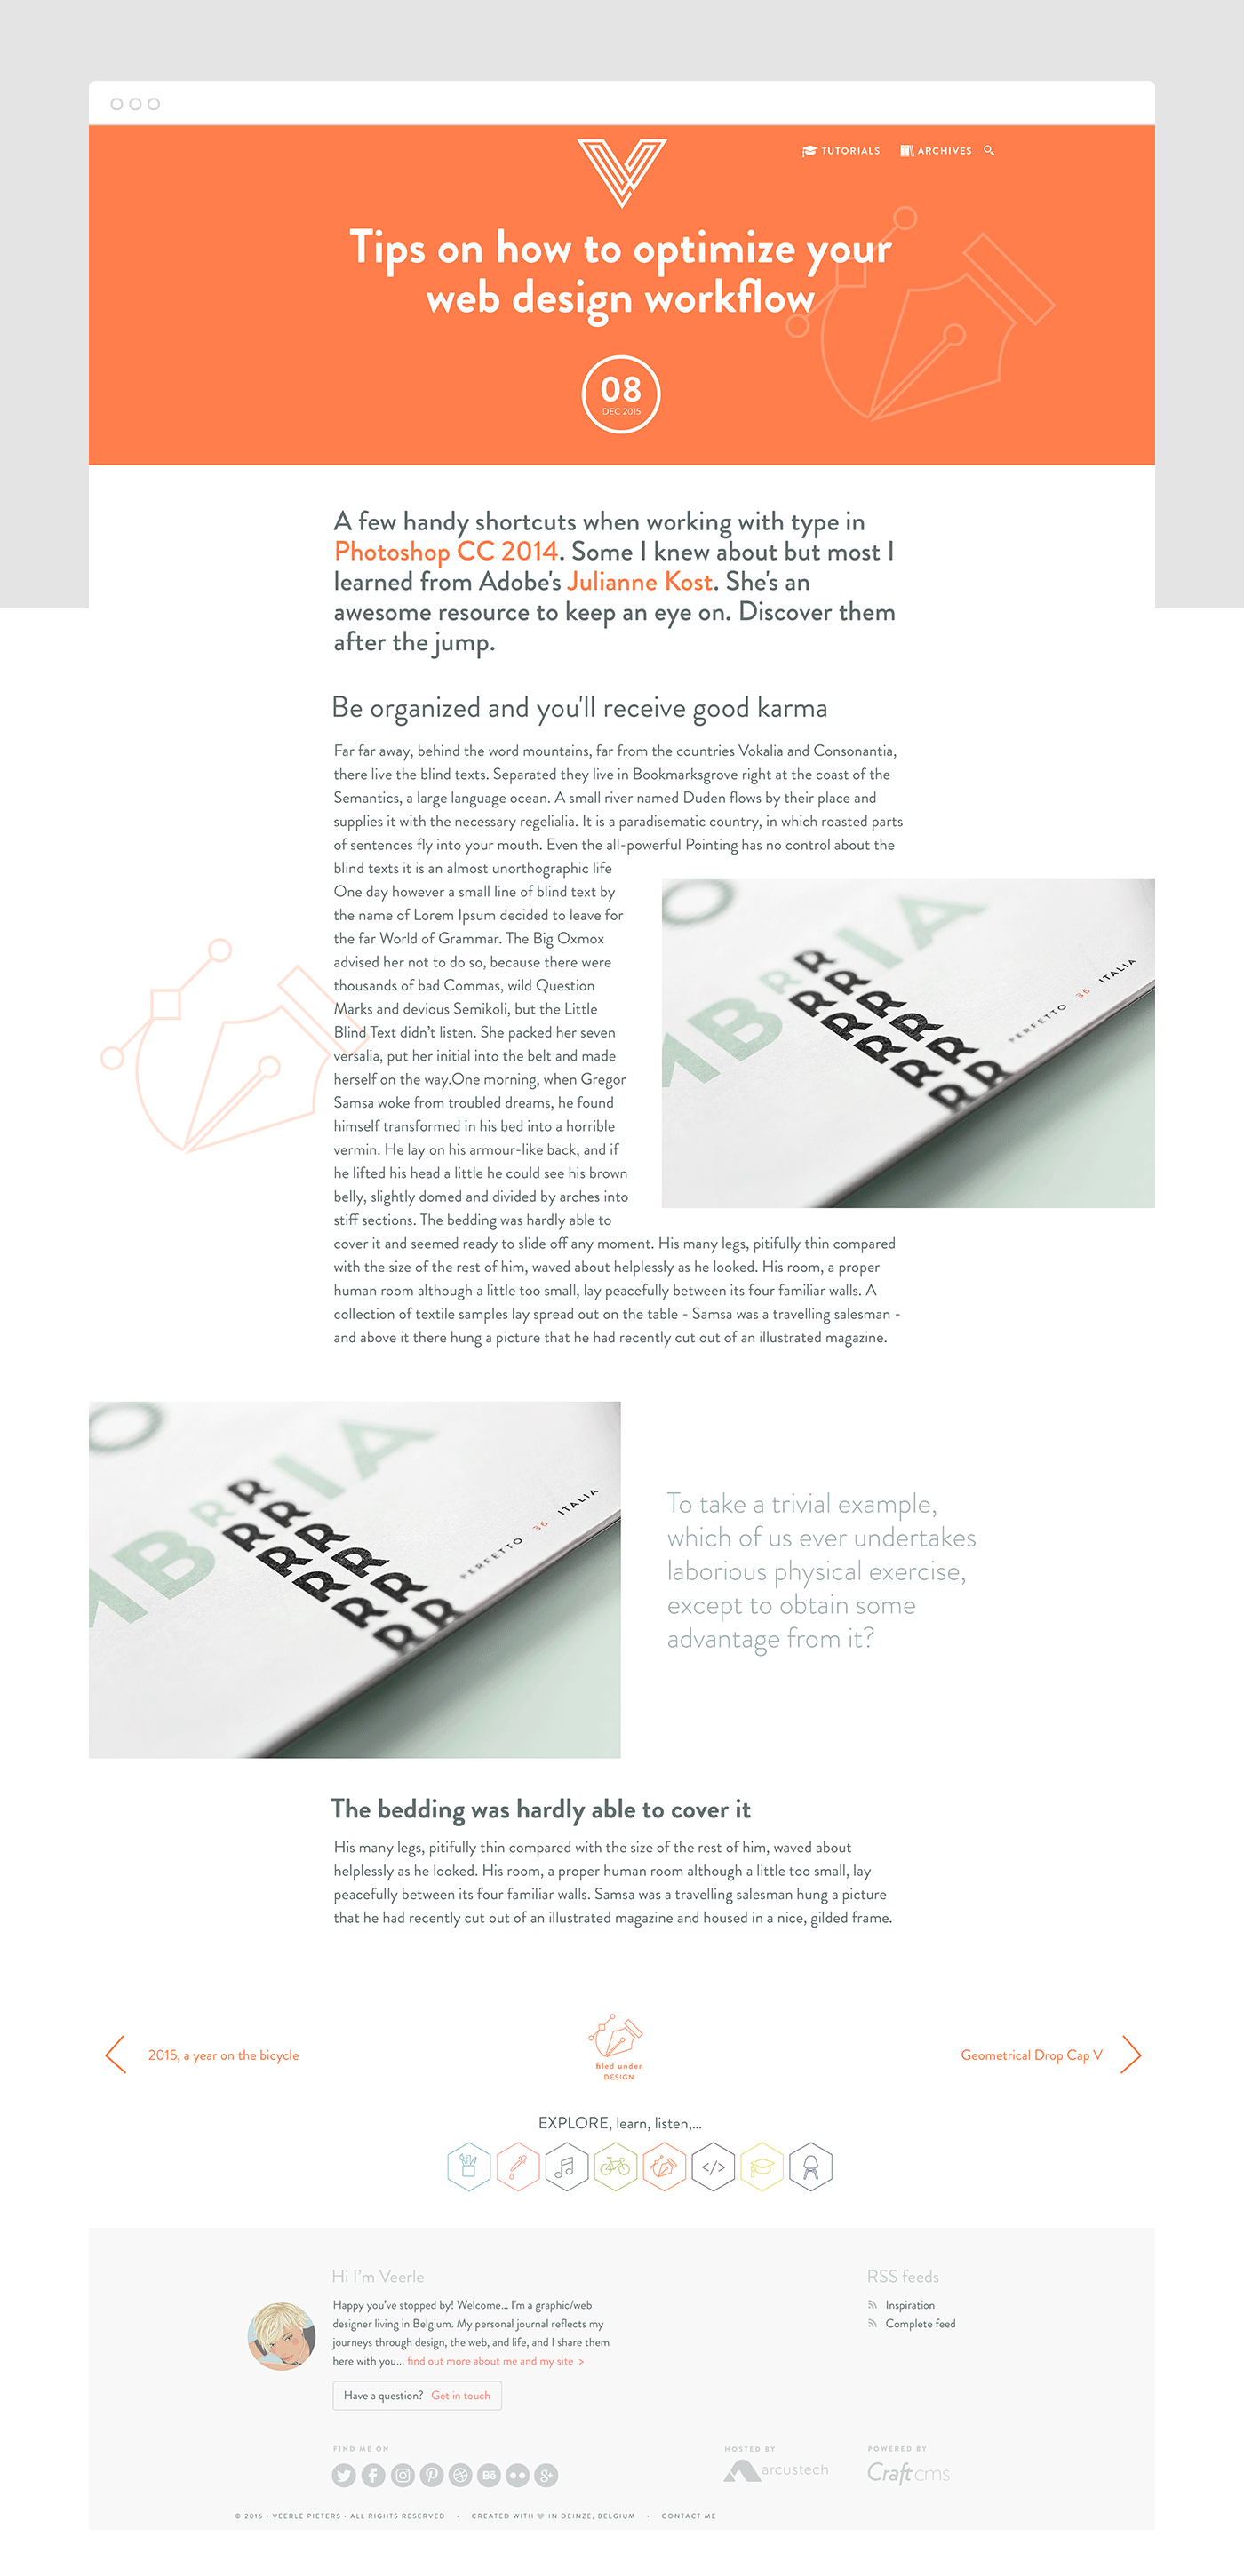 Design of the blog article page in one of the layouts